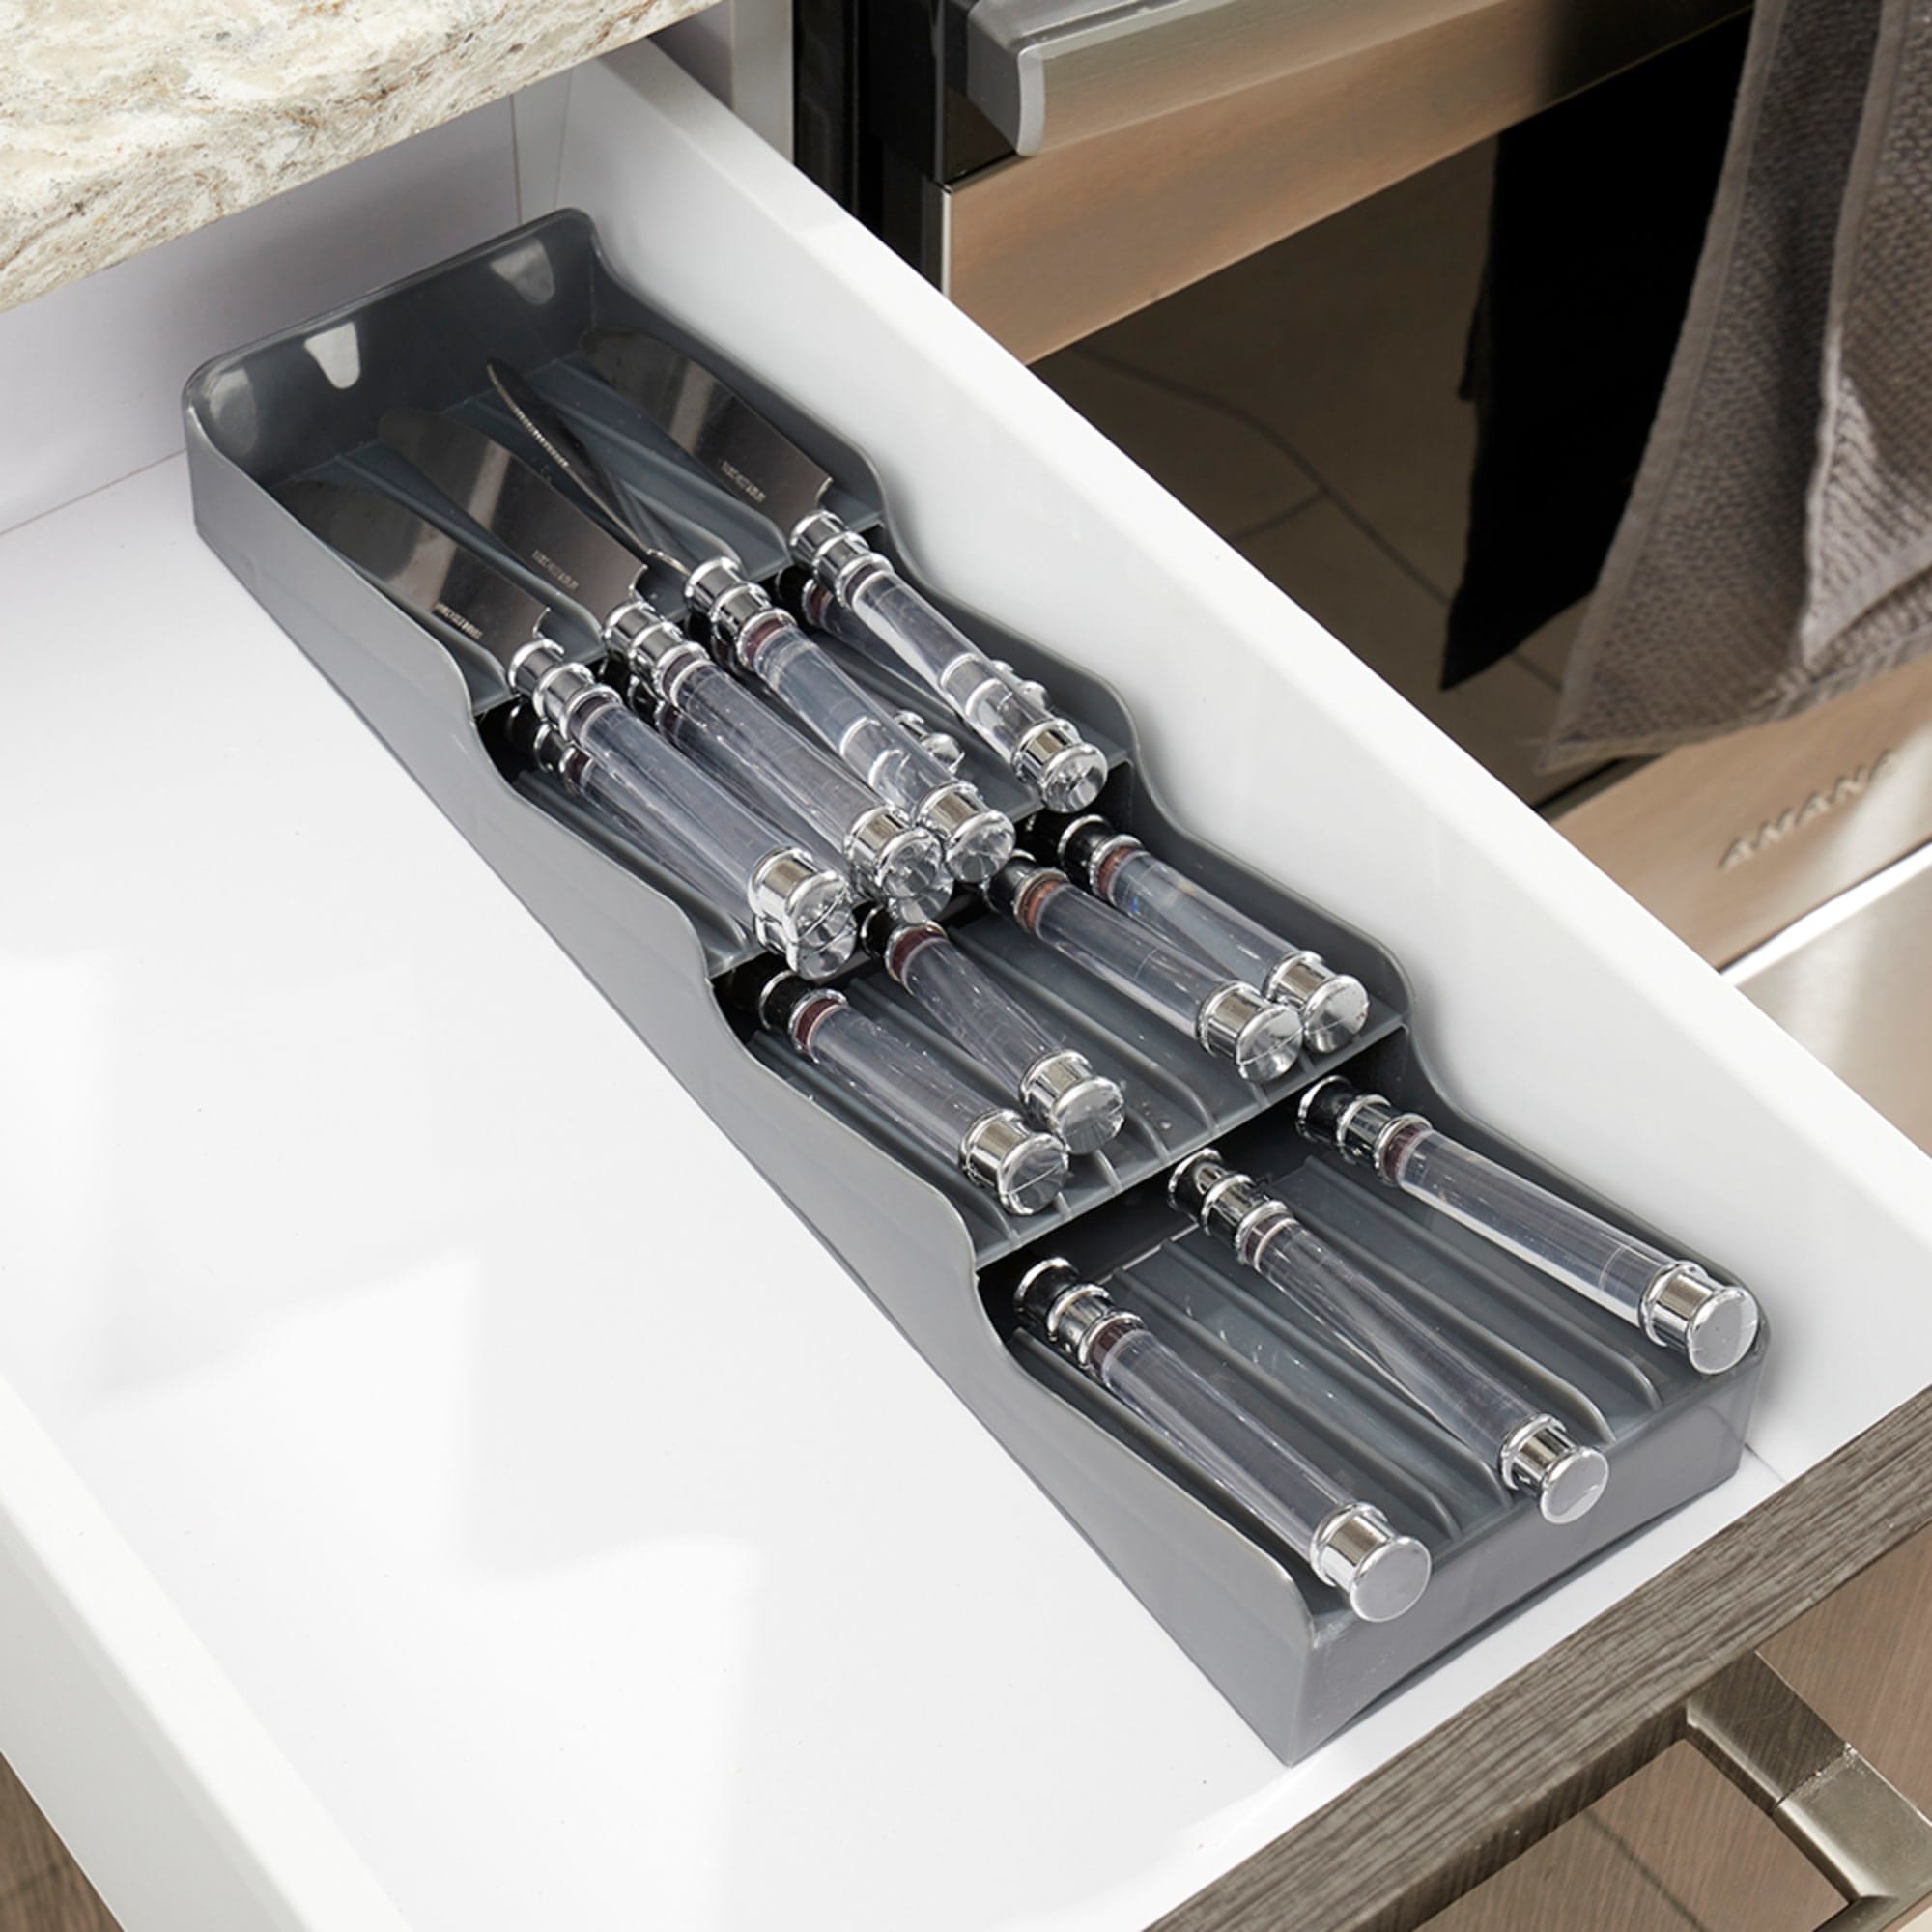 Home Basics Plastic Compact Kitchen Drawer Flatware Organizer, Grey $5.00 EACH, CASE PACK OF 12